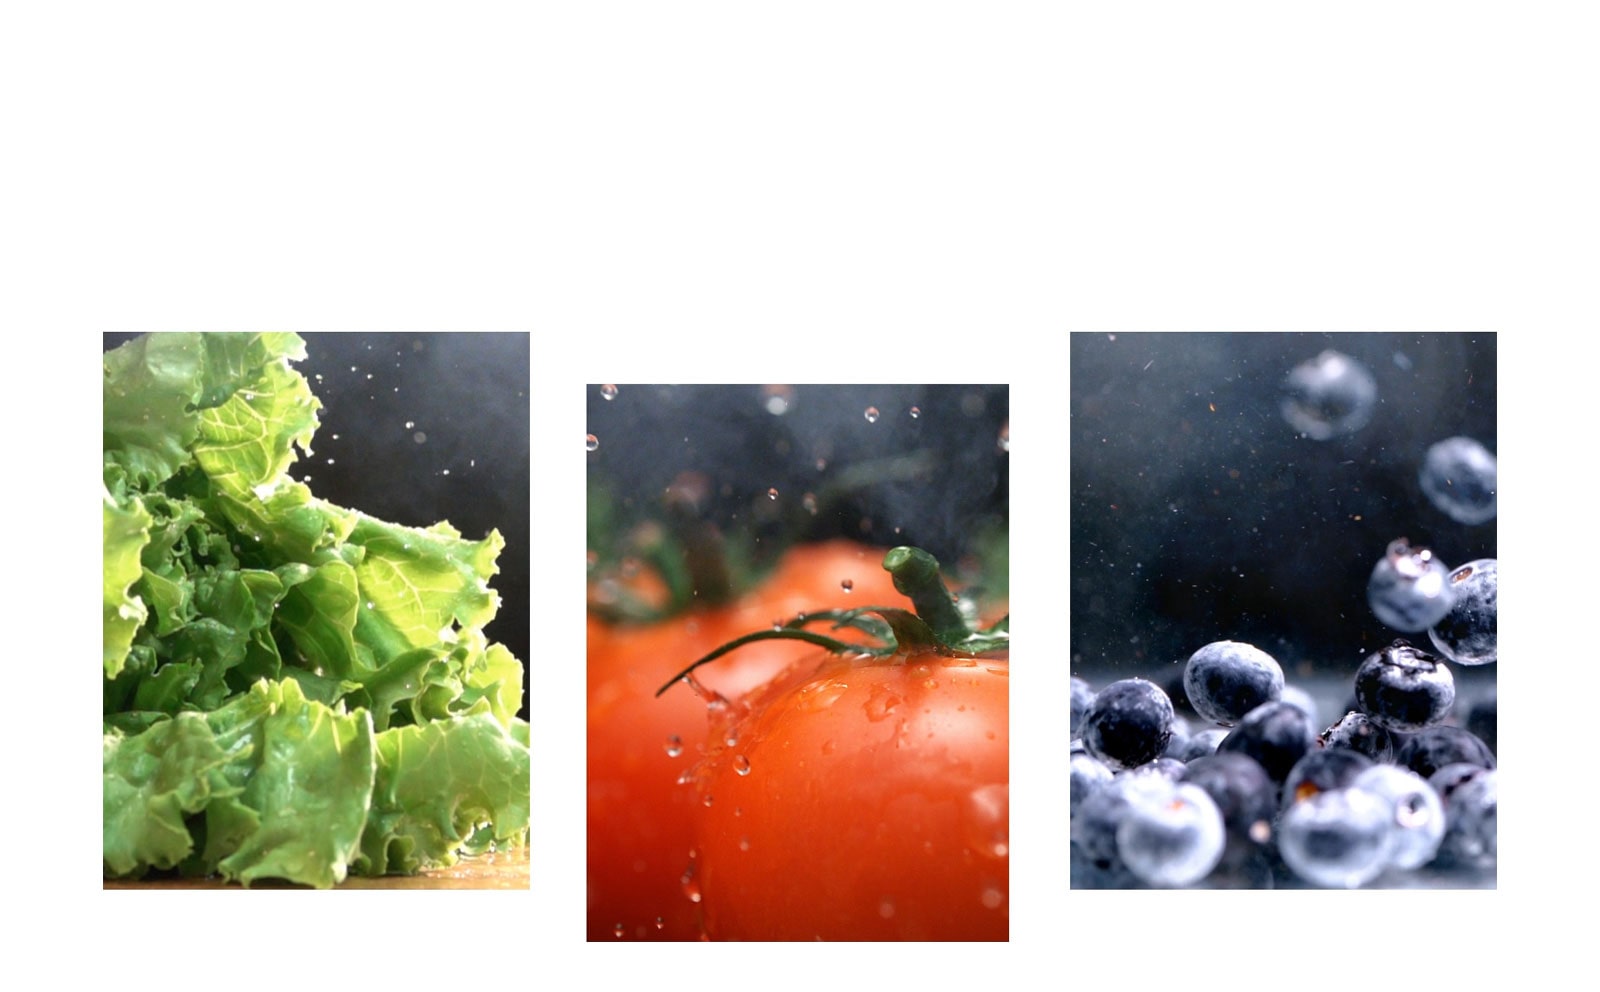 An image of crisp green lettuce is next to an image of fresh red tomatoes, and an image of bright blueberries.